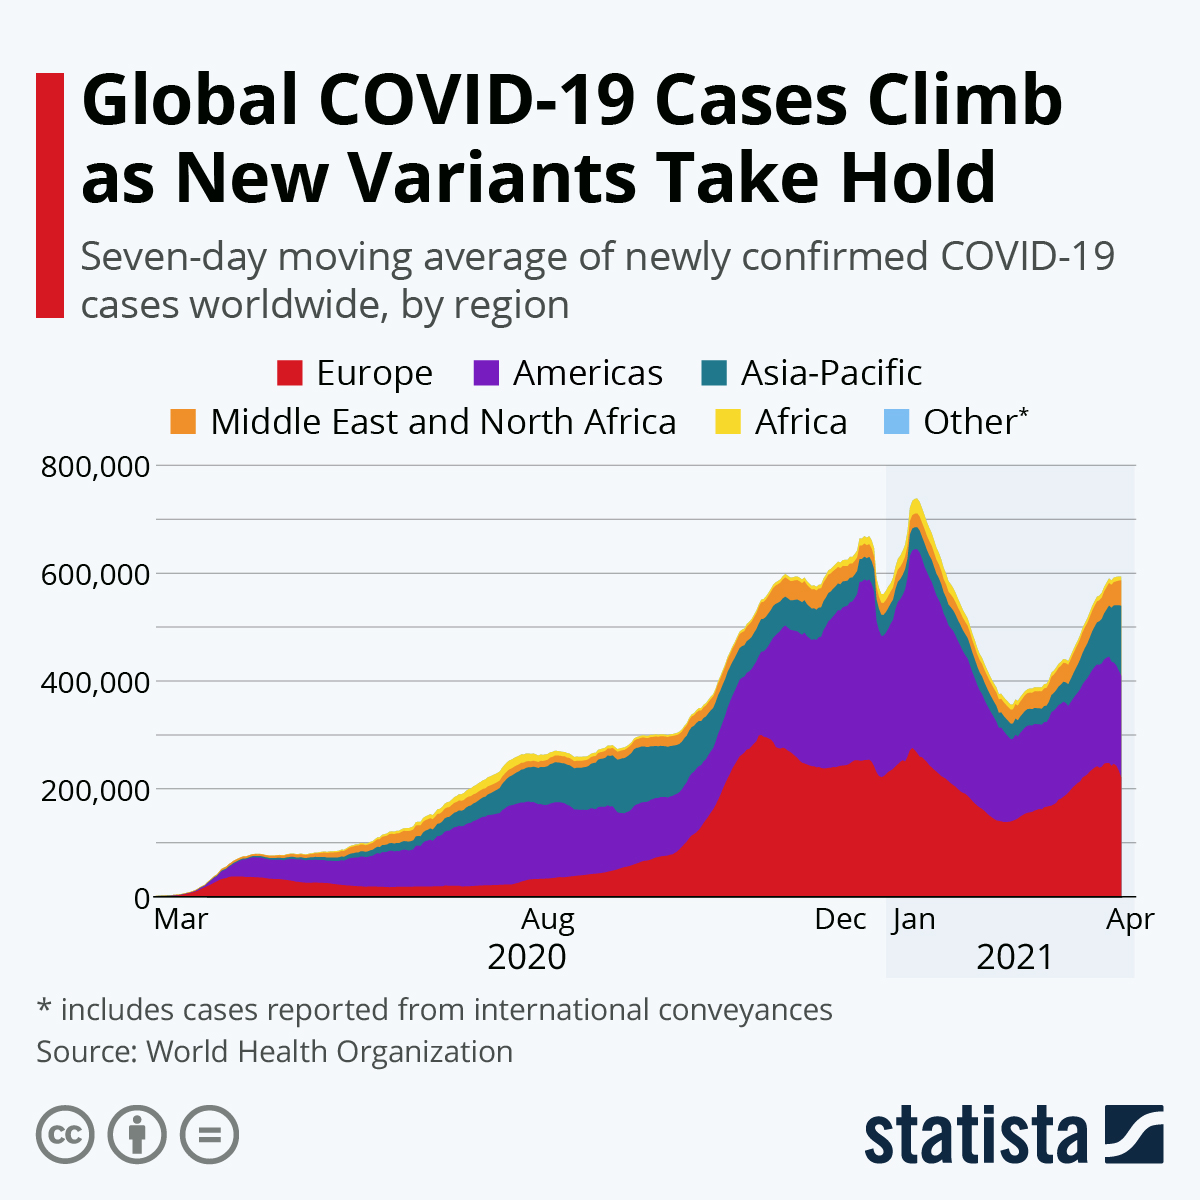 Global COVID-19 Cases Climb as New Variants Take Hold